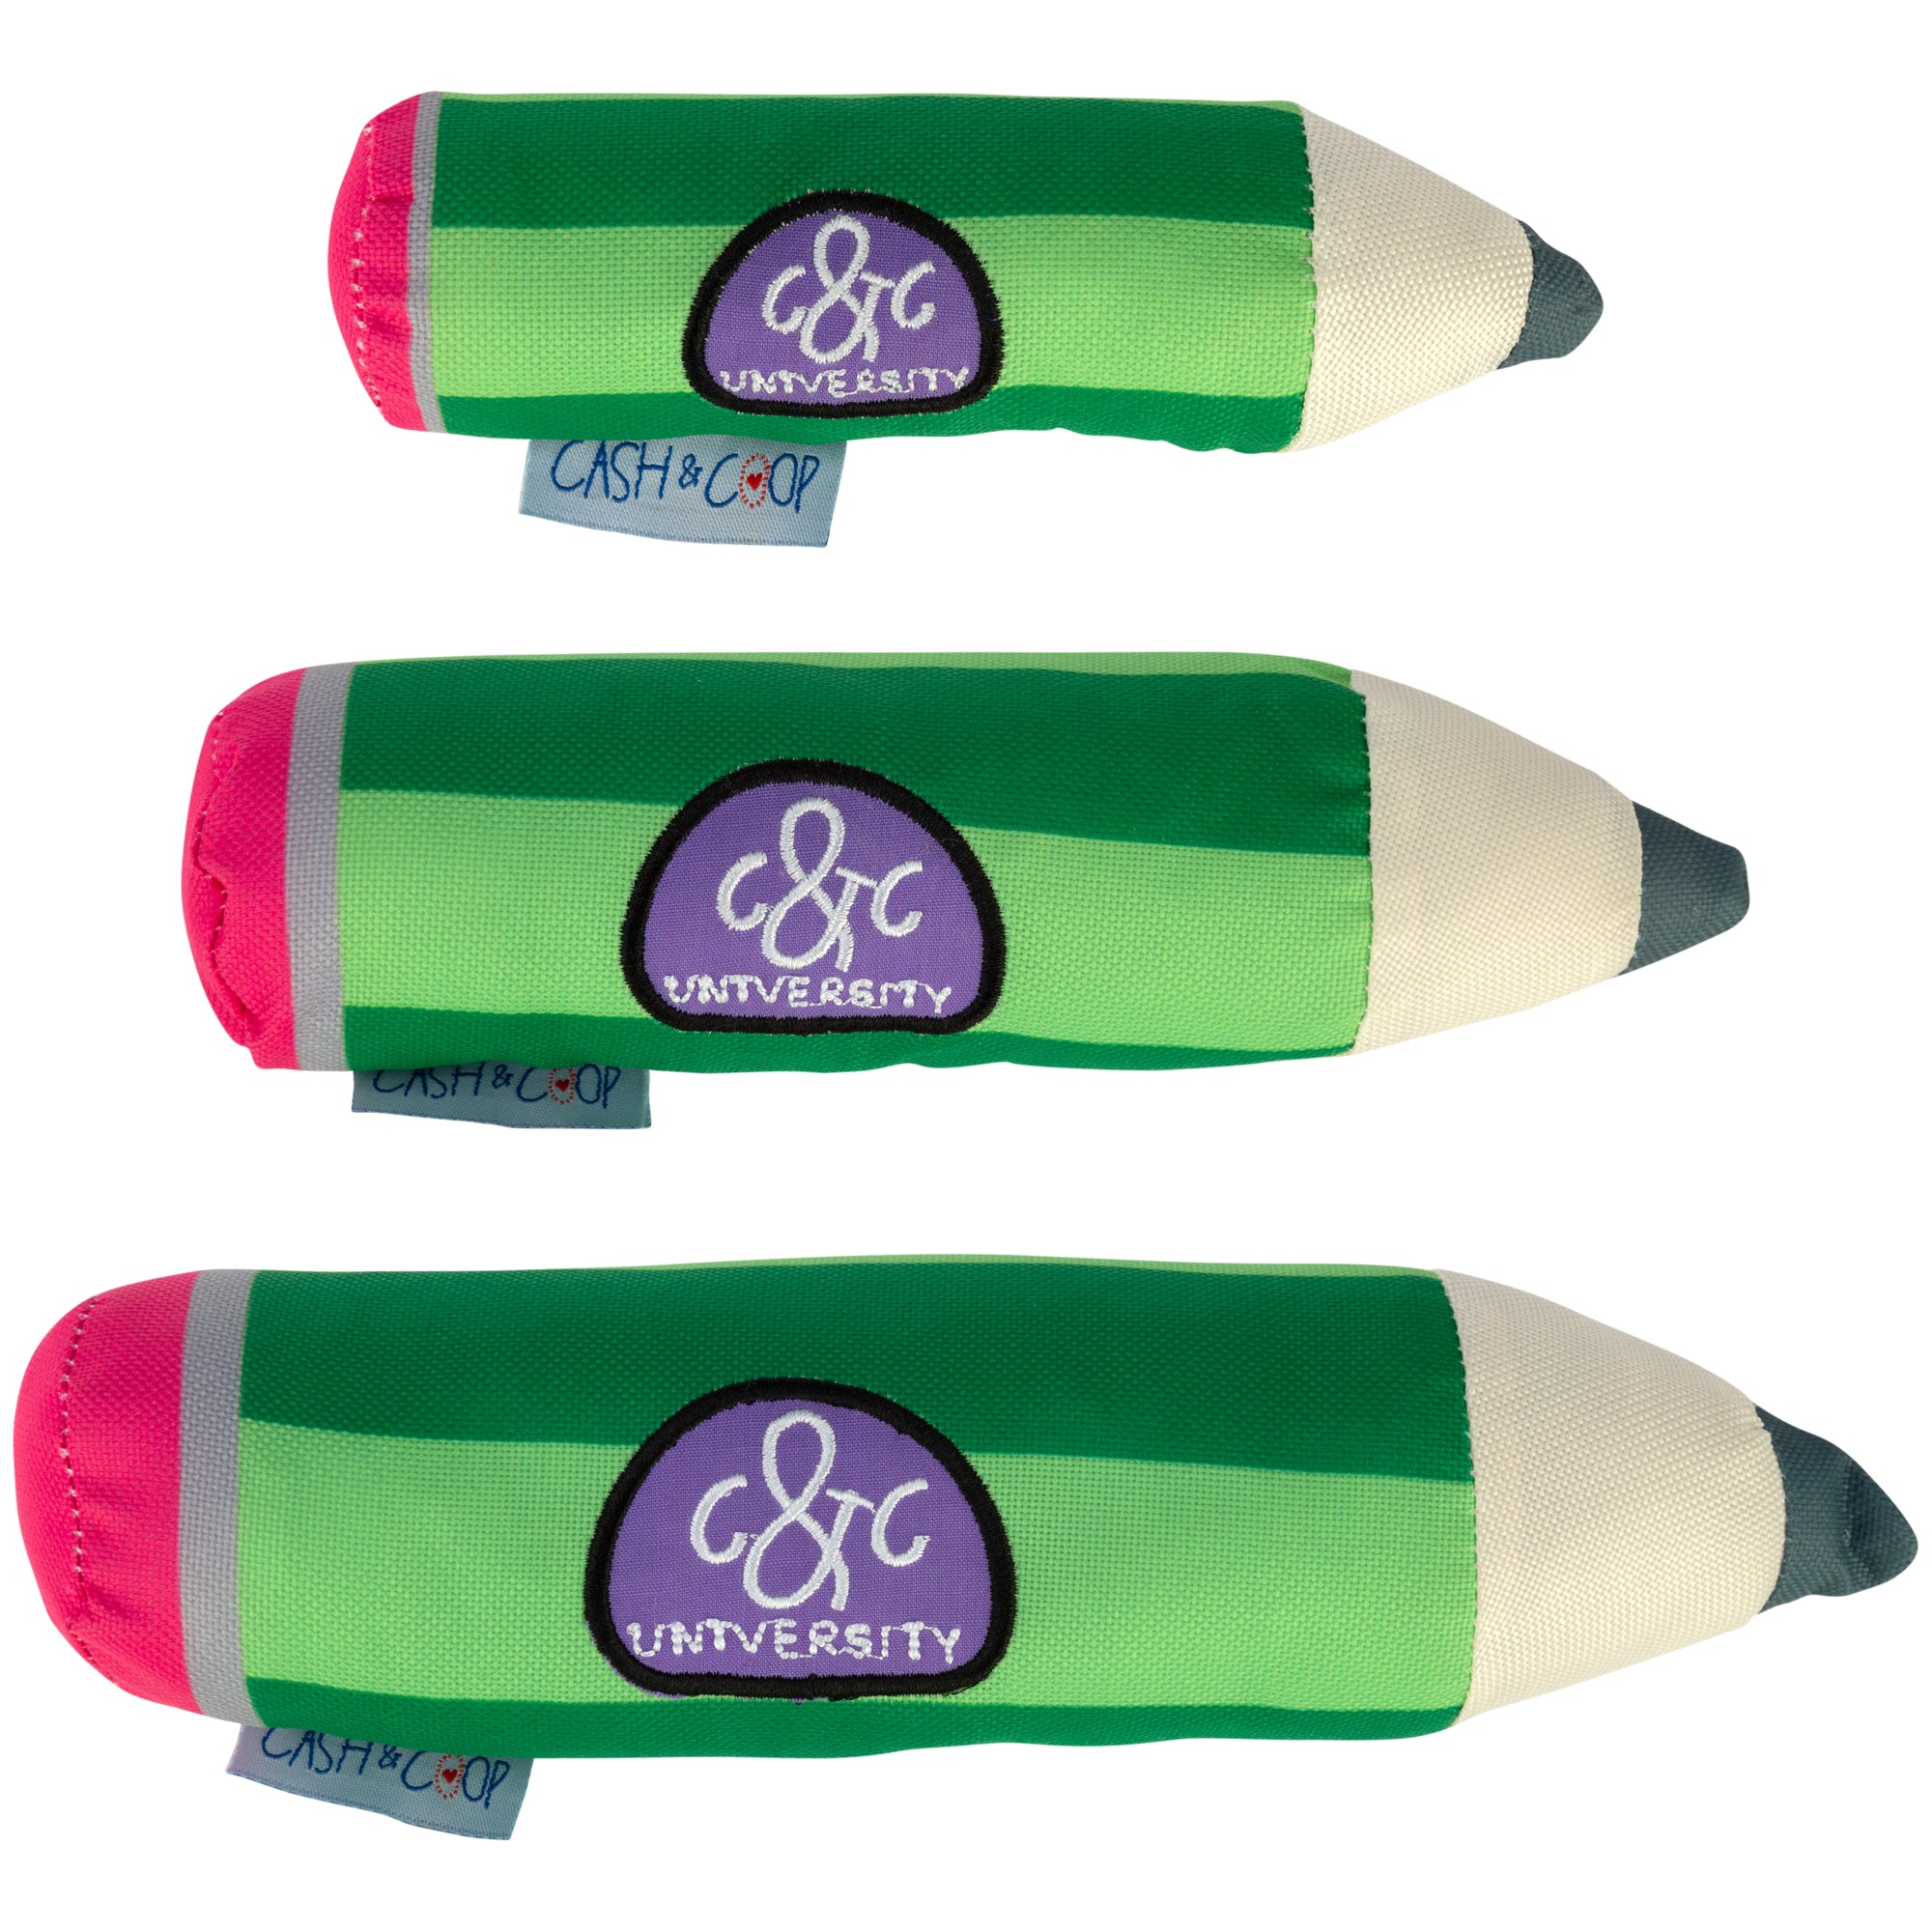 Cash & Coop Pencil Chew Toy - Small